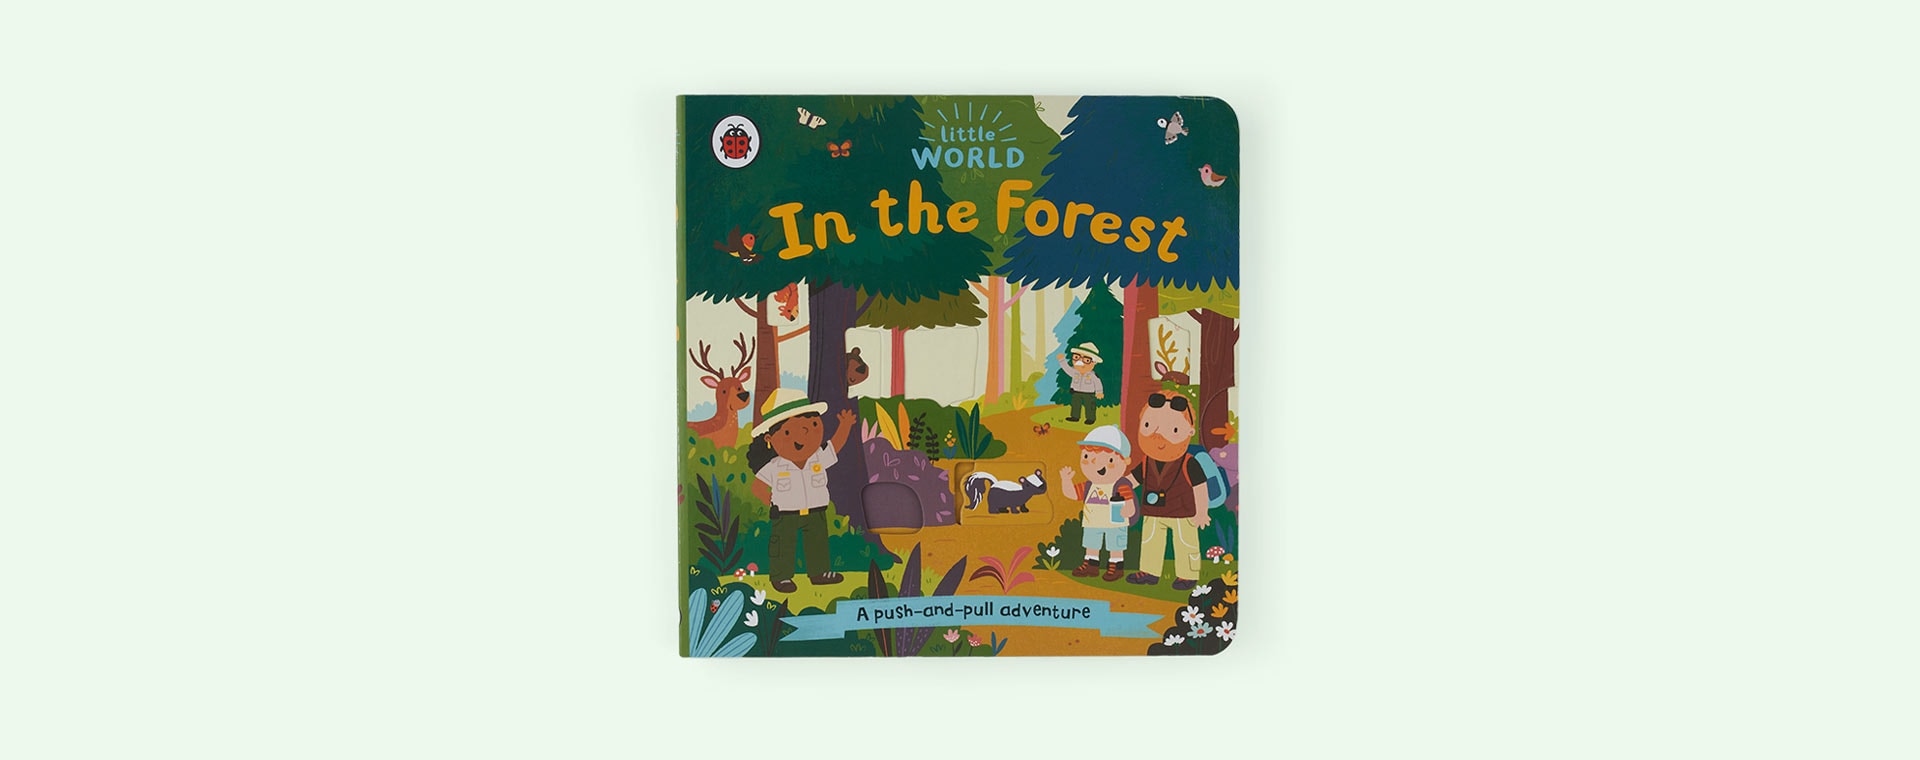 In the Forrest bookspeed Little World: In The Forest